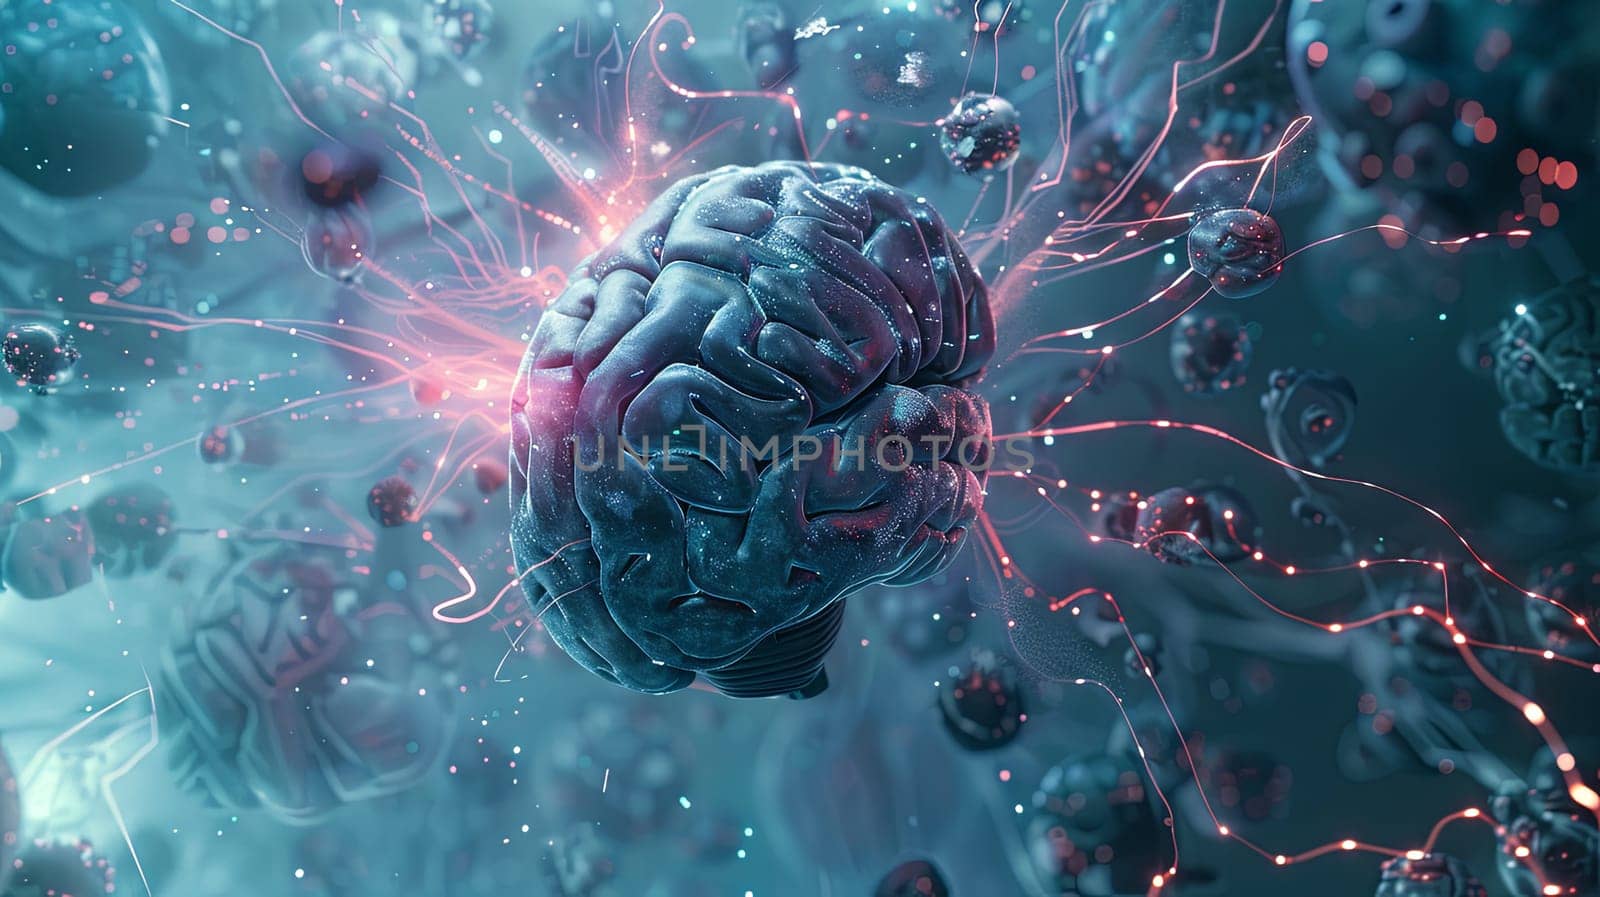 Abstract visualization of a human brain intertwined with digital elements and neural networks, representing the merging of human intelligence and artificial intelligence.